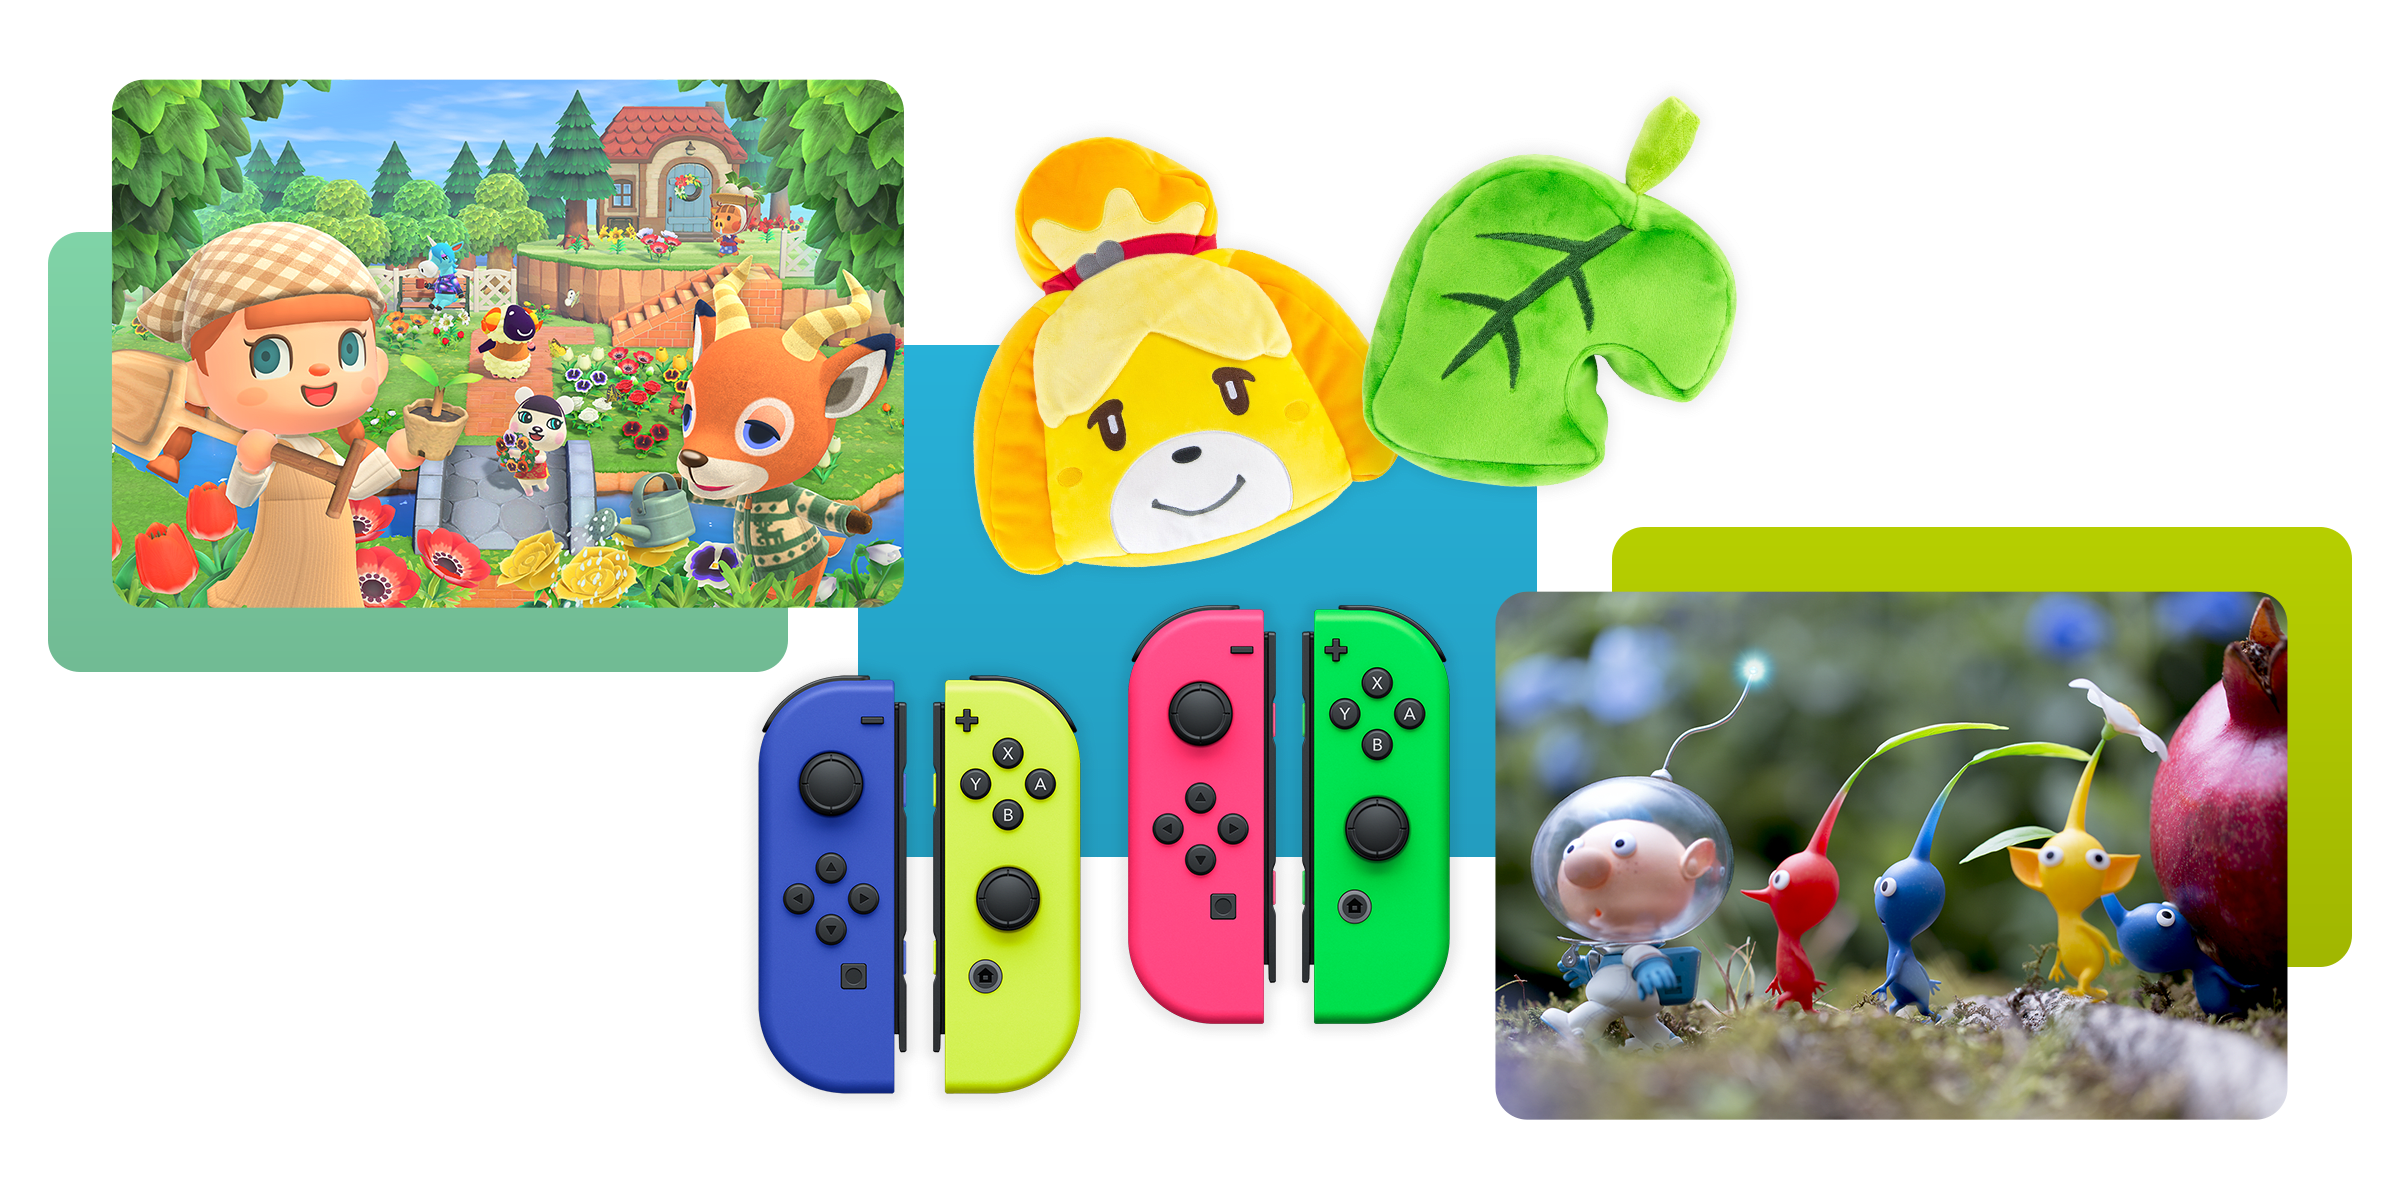 Animal Crossing New Horizons, Plush, Joy-Con Controllers, Pikmin 3 Deluxe